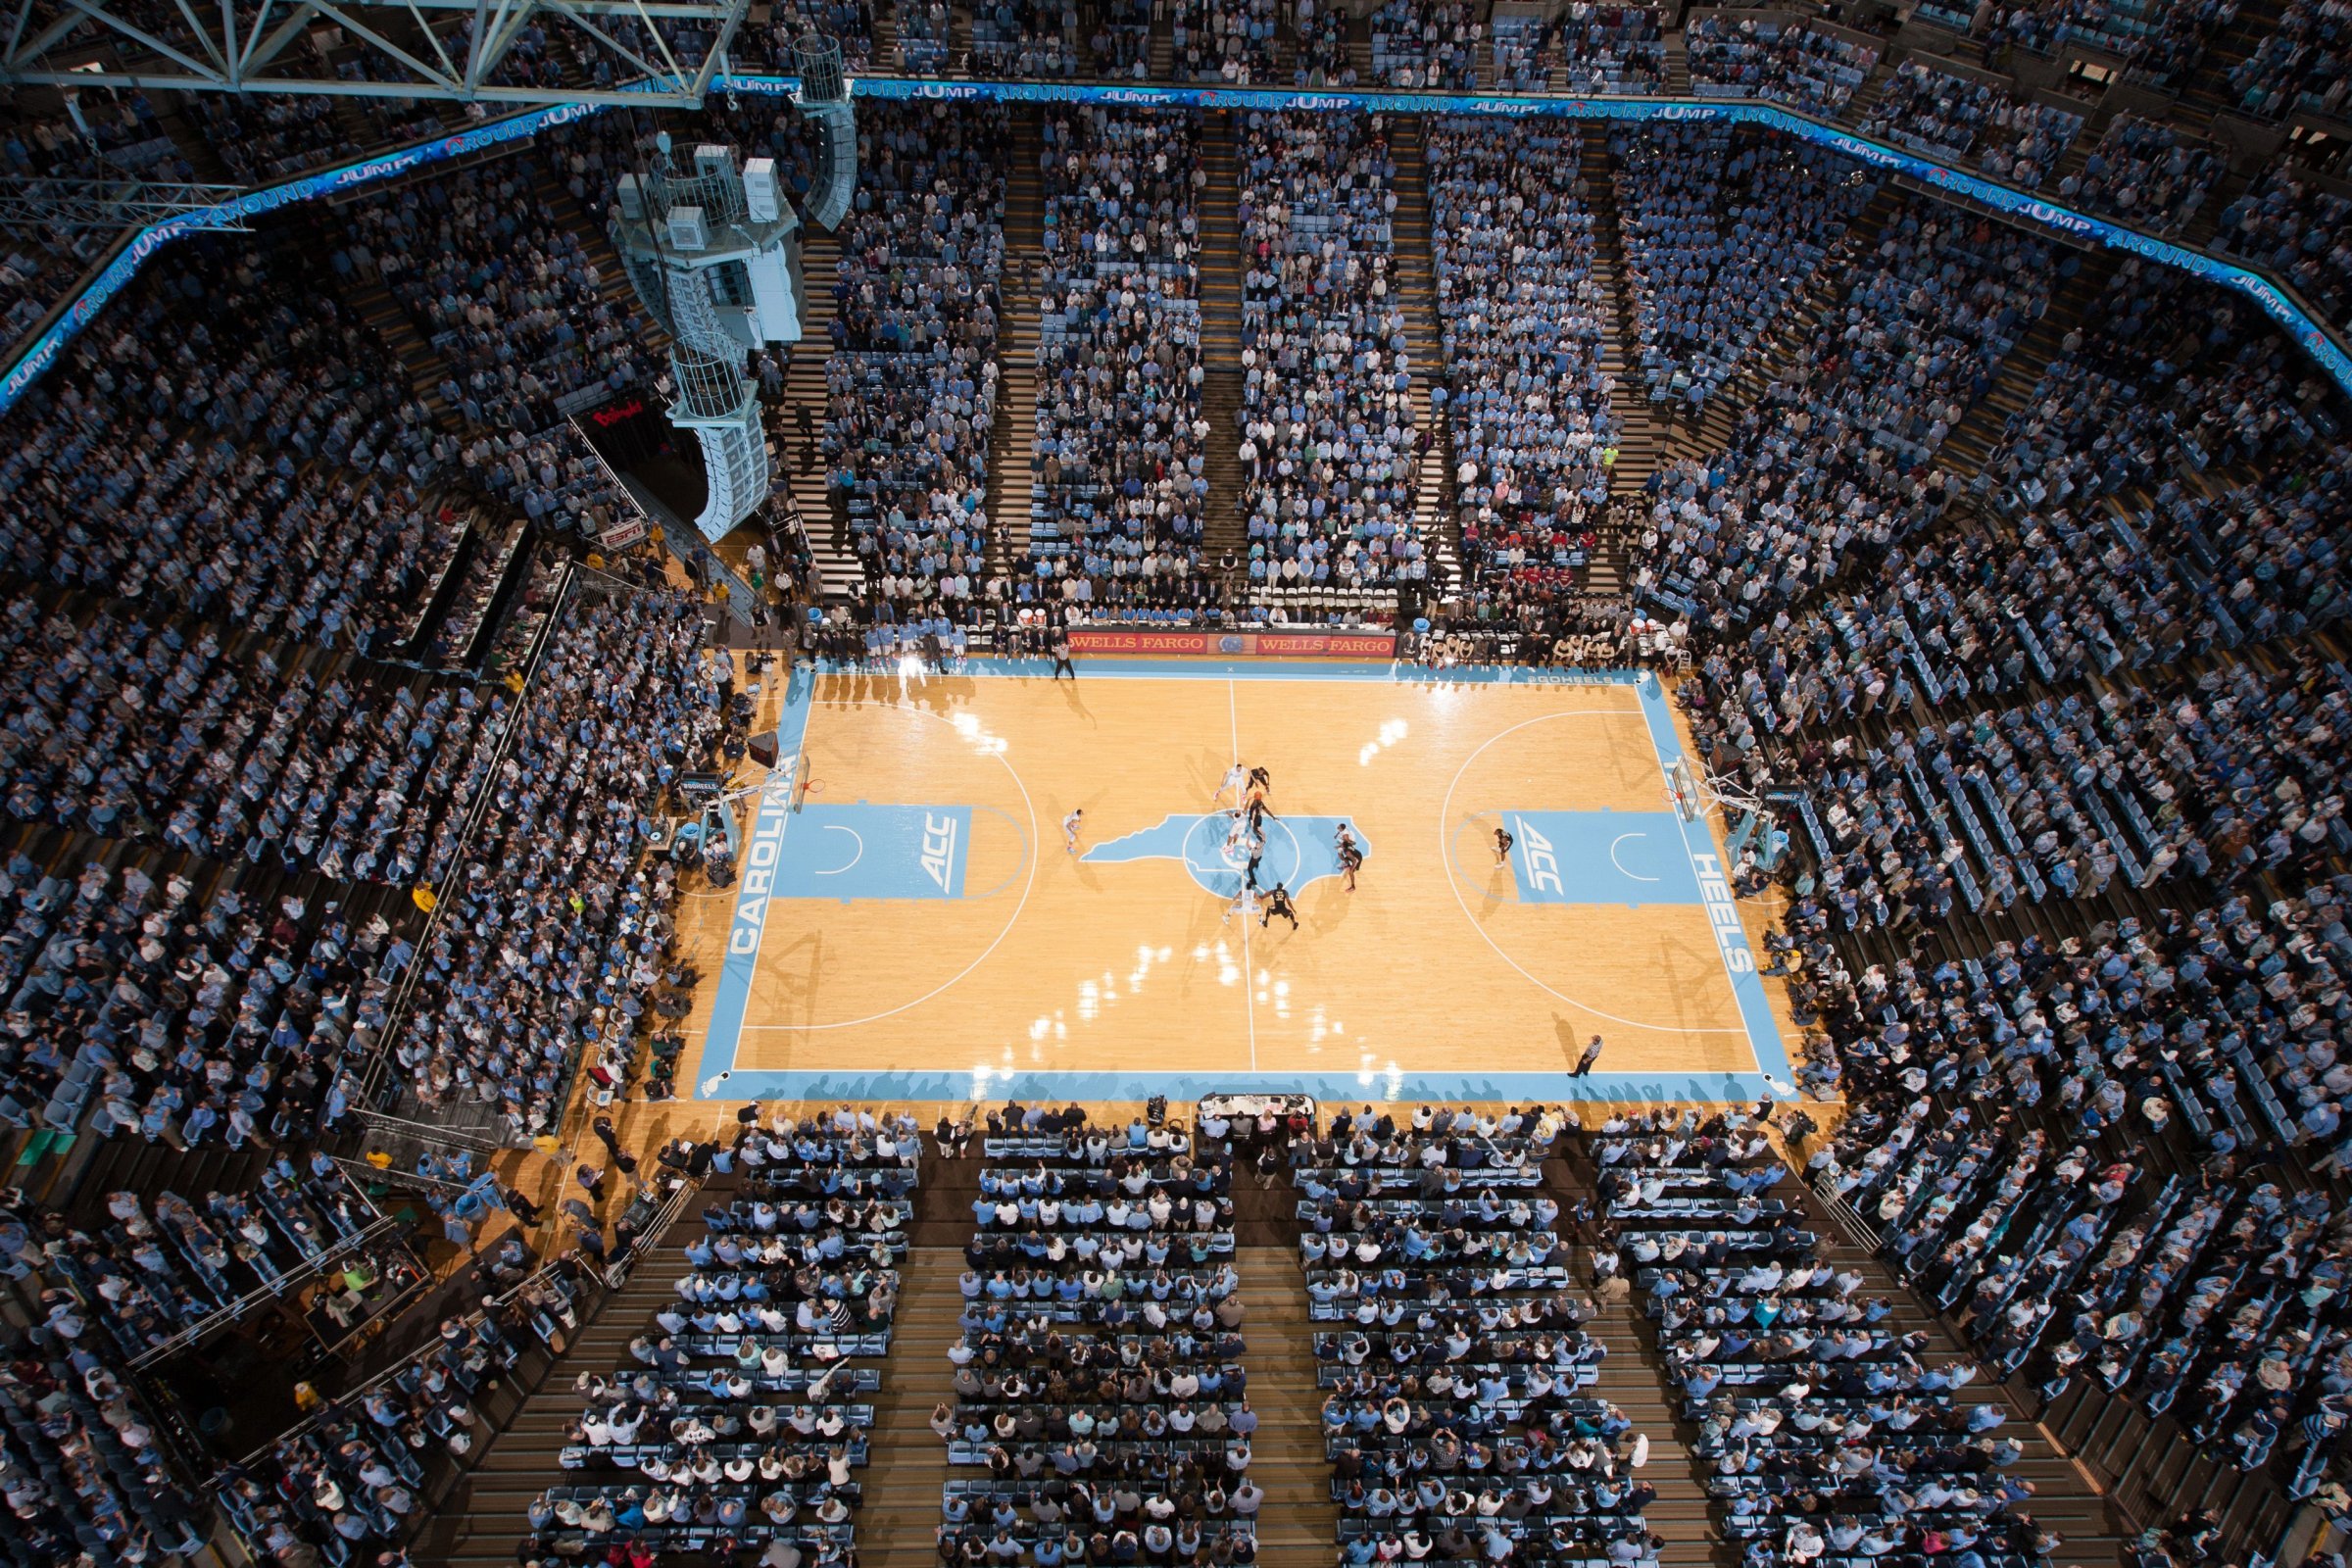 CHAPEL HILL, NC - JANUARY 24: A wide-angle overhead general view of the Dean Smith Center as the North Carolina Tar Heels play against the Florida State Seminoles on January 24, 2015 at the Dean E. Smith Center in Chapel Hill, North Carolina. North Carolina won 78-74. (Photo by Peyton Williams/UNC/Getty Images)